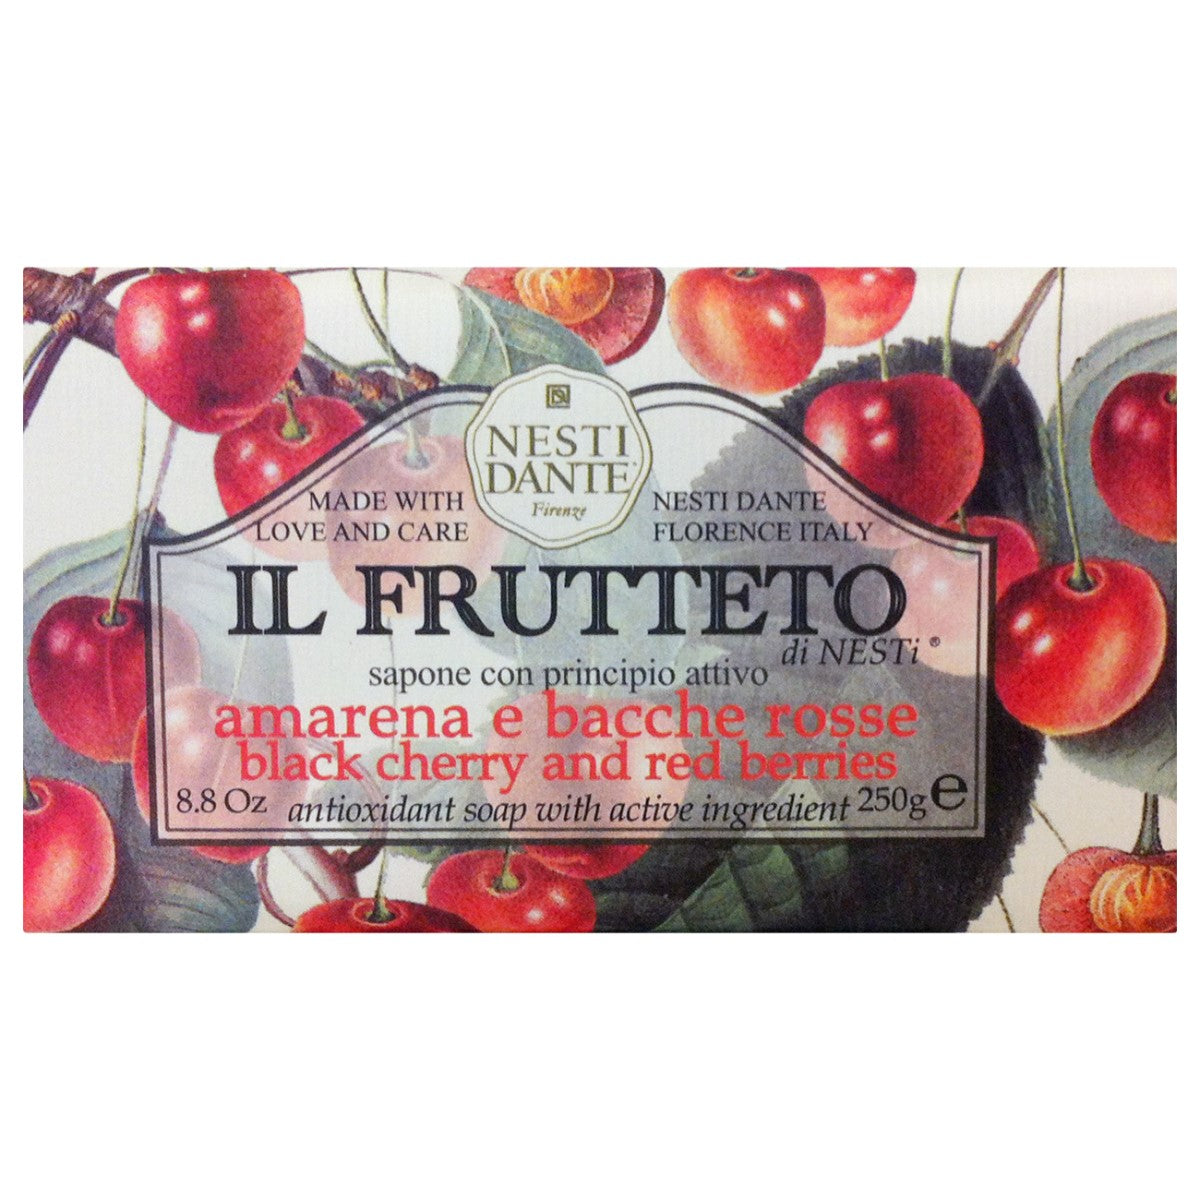 Primary Image of Il Frutteto Black Cherry and Red Berries Soap